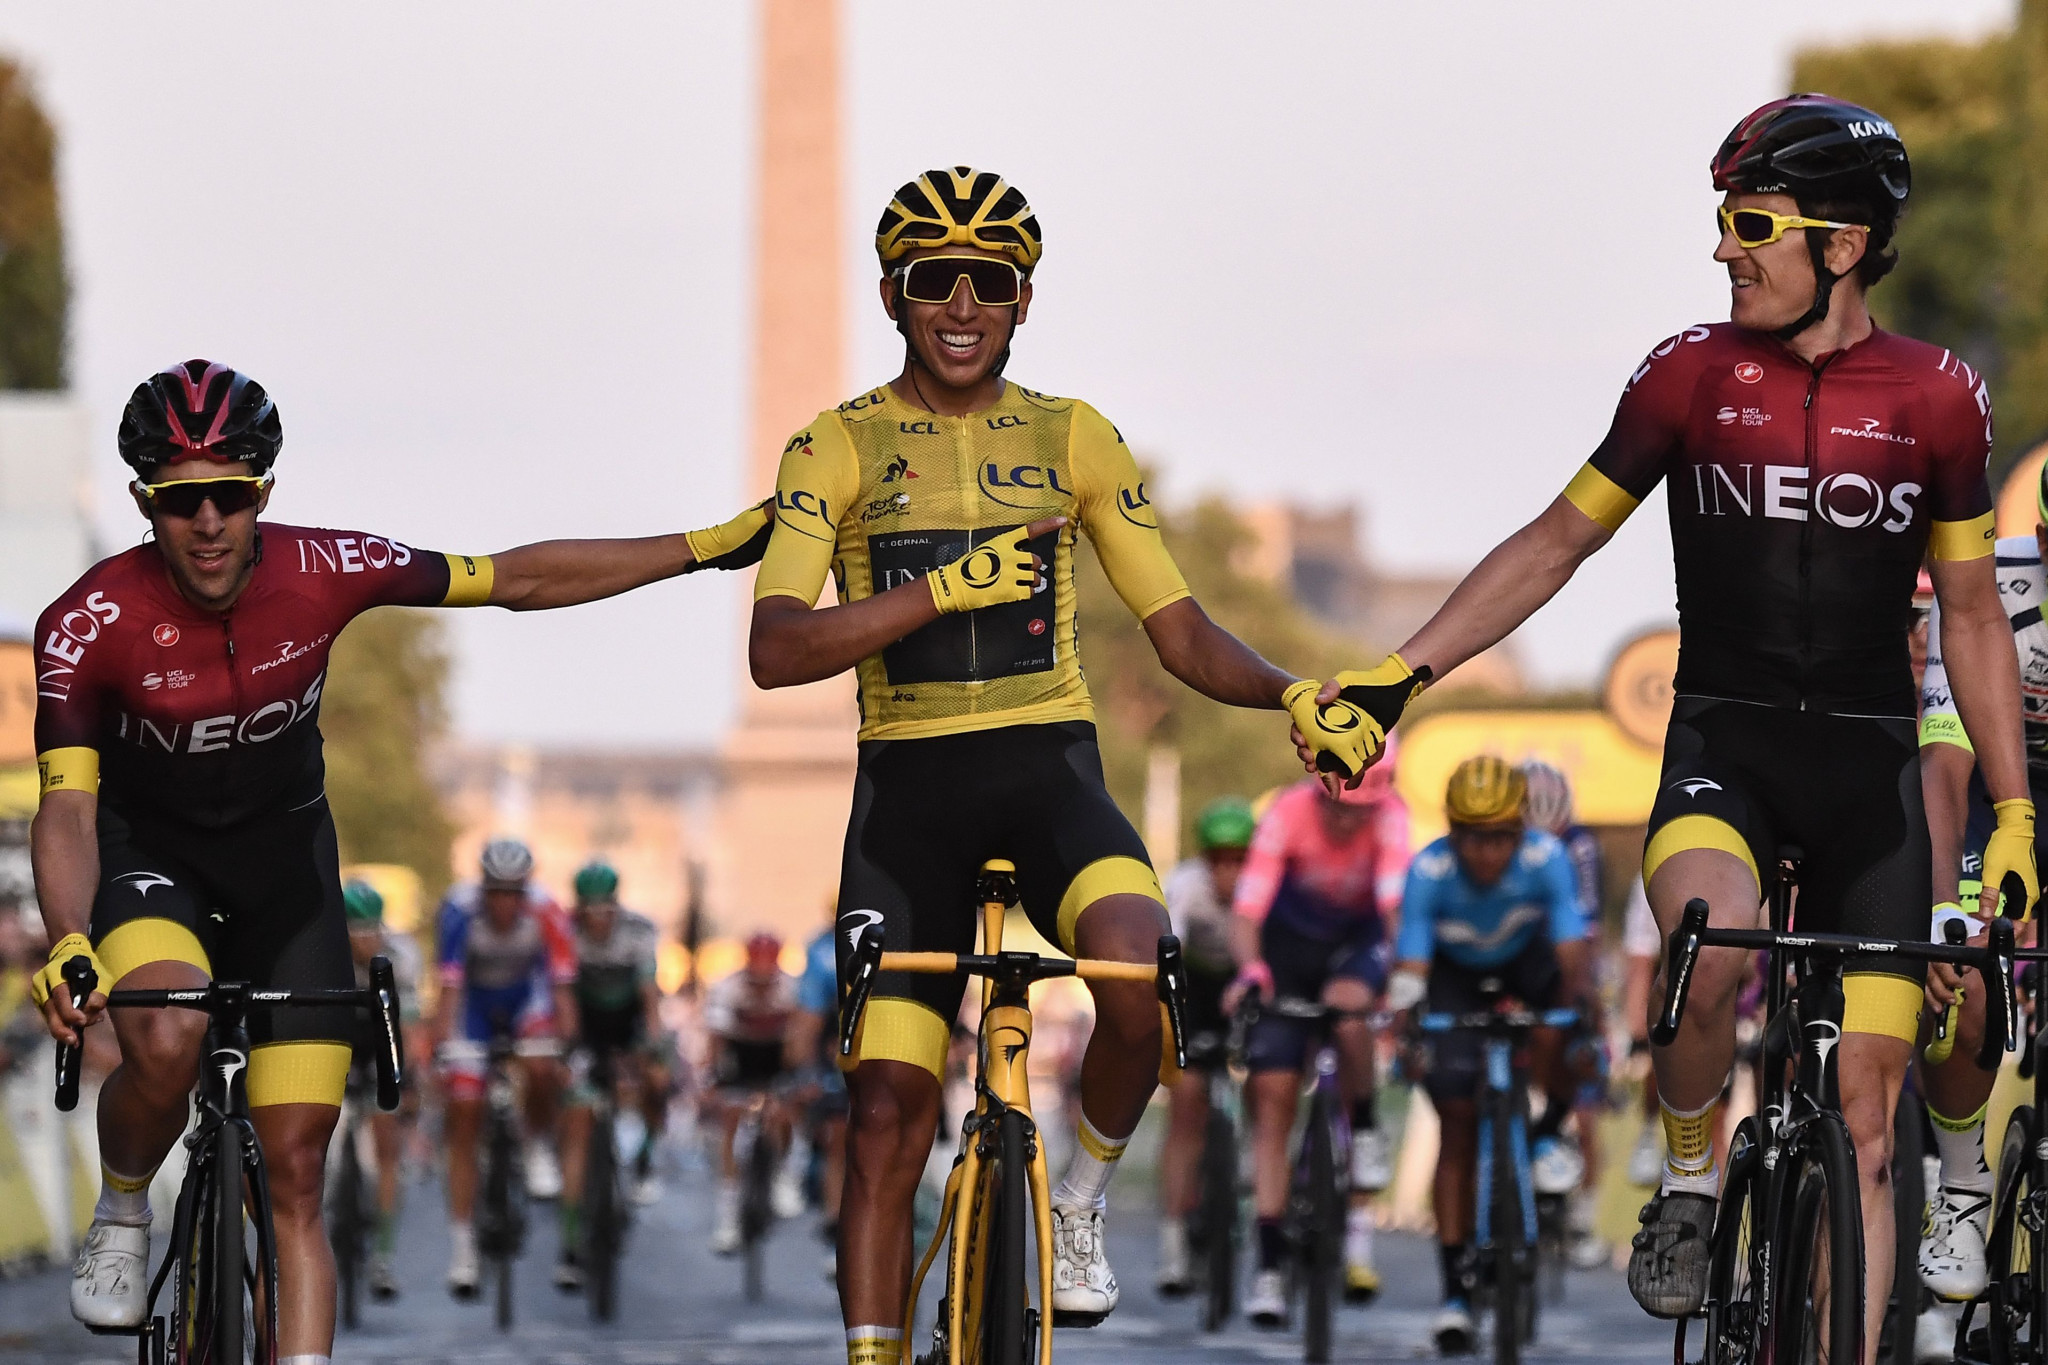 Bernal crowned first Colombian winner of Tour de France after final stage in Paris